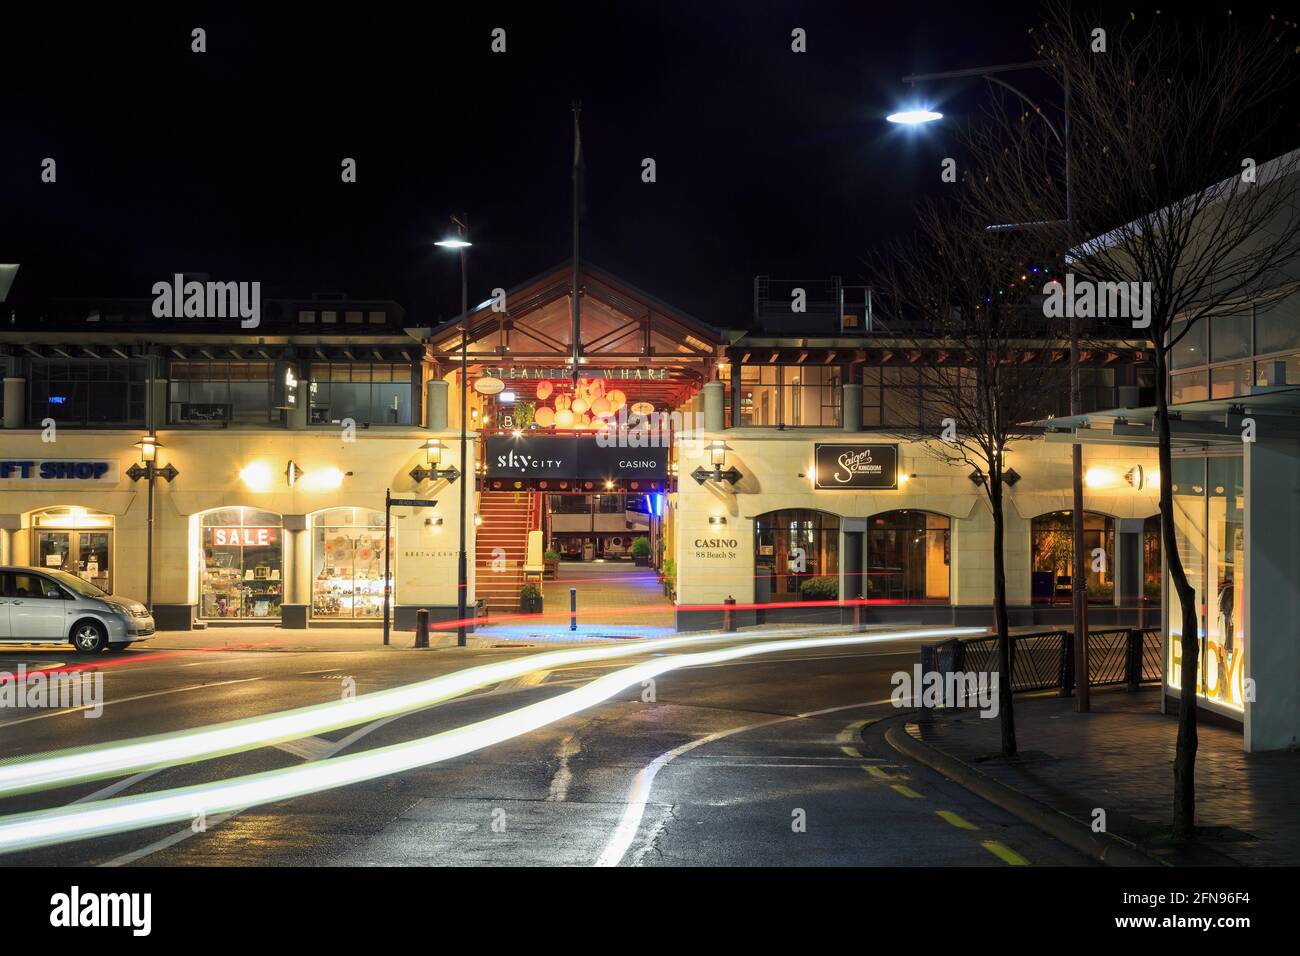 The Sky City Casino building on Steamer Wharf, Queenstown, New Zealand, at night Stock Photo